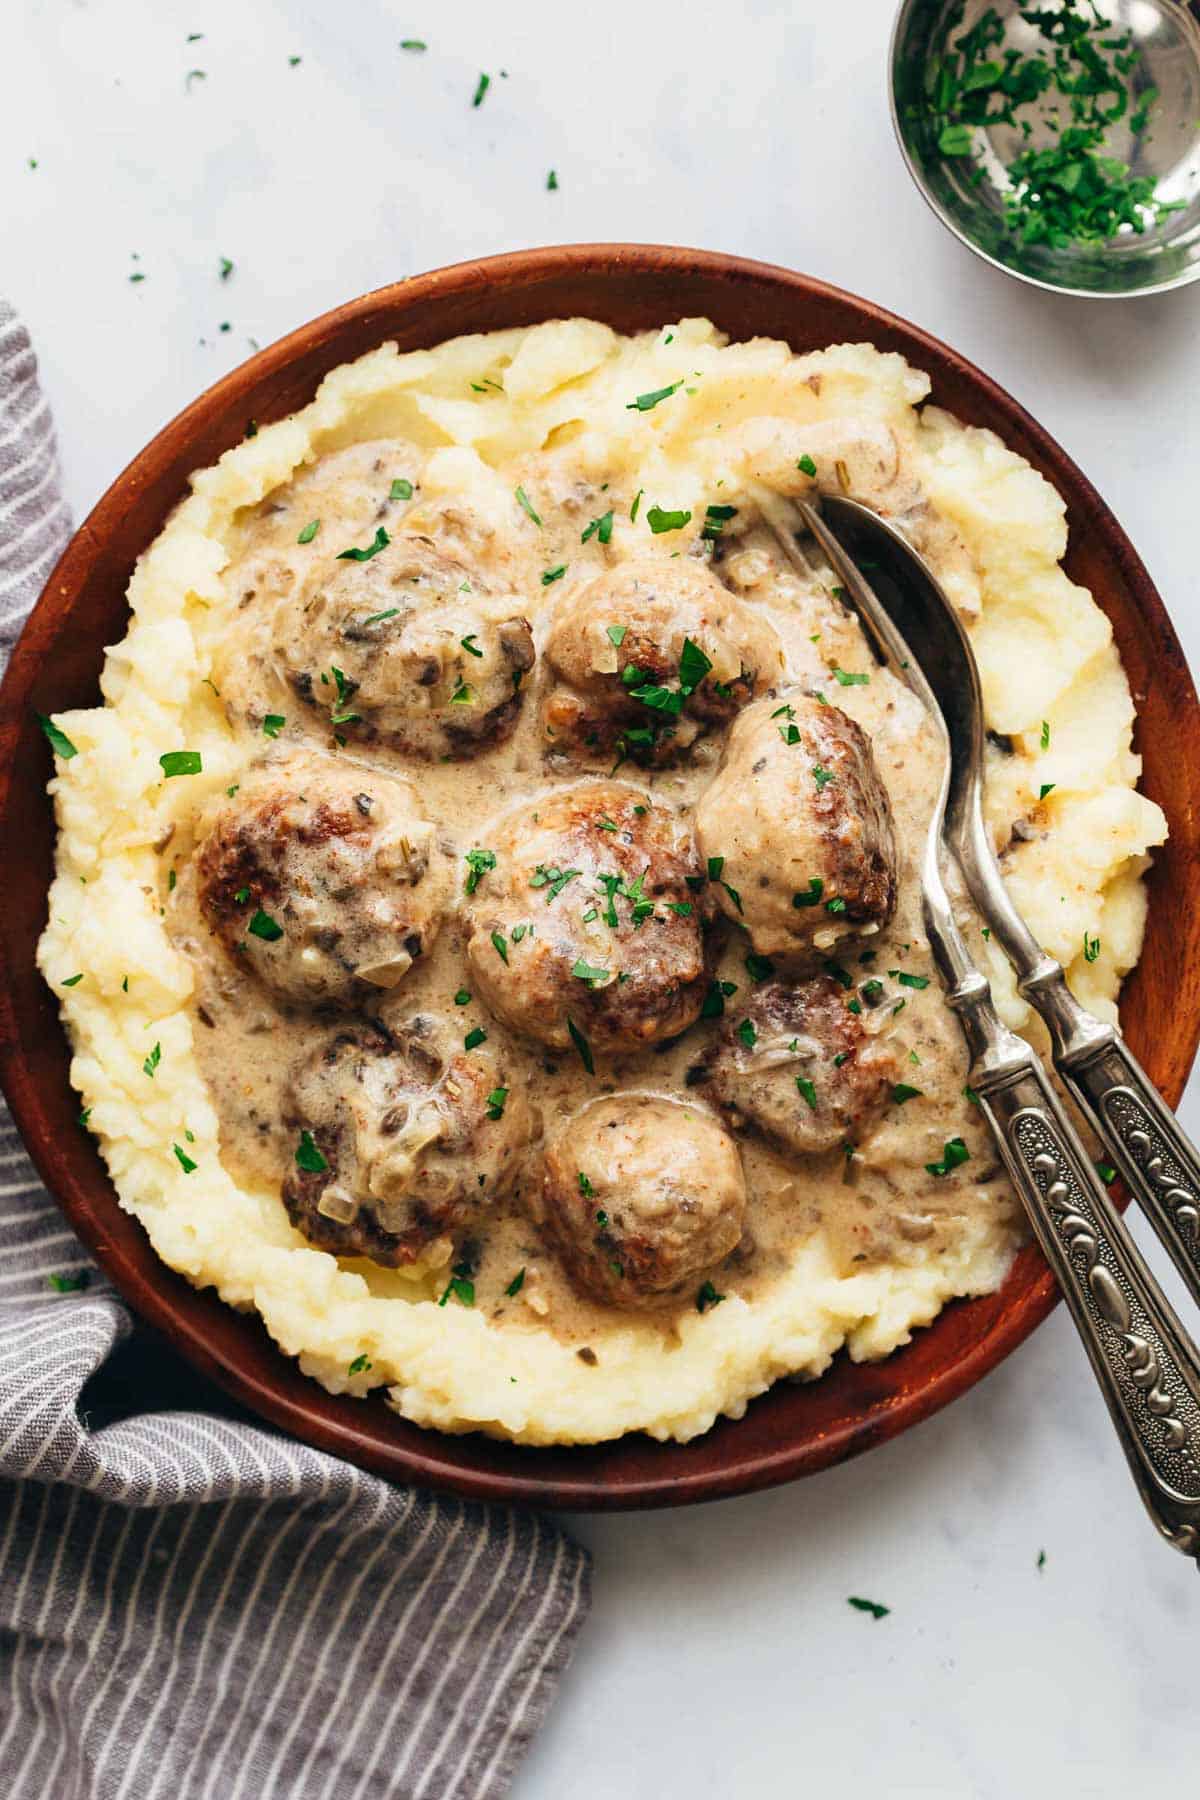 Creamy chicken meatballs in mushroom sauce served over mashed potatoes in a bowl